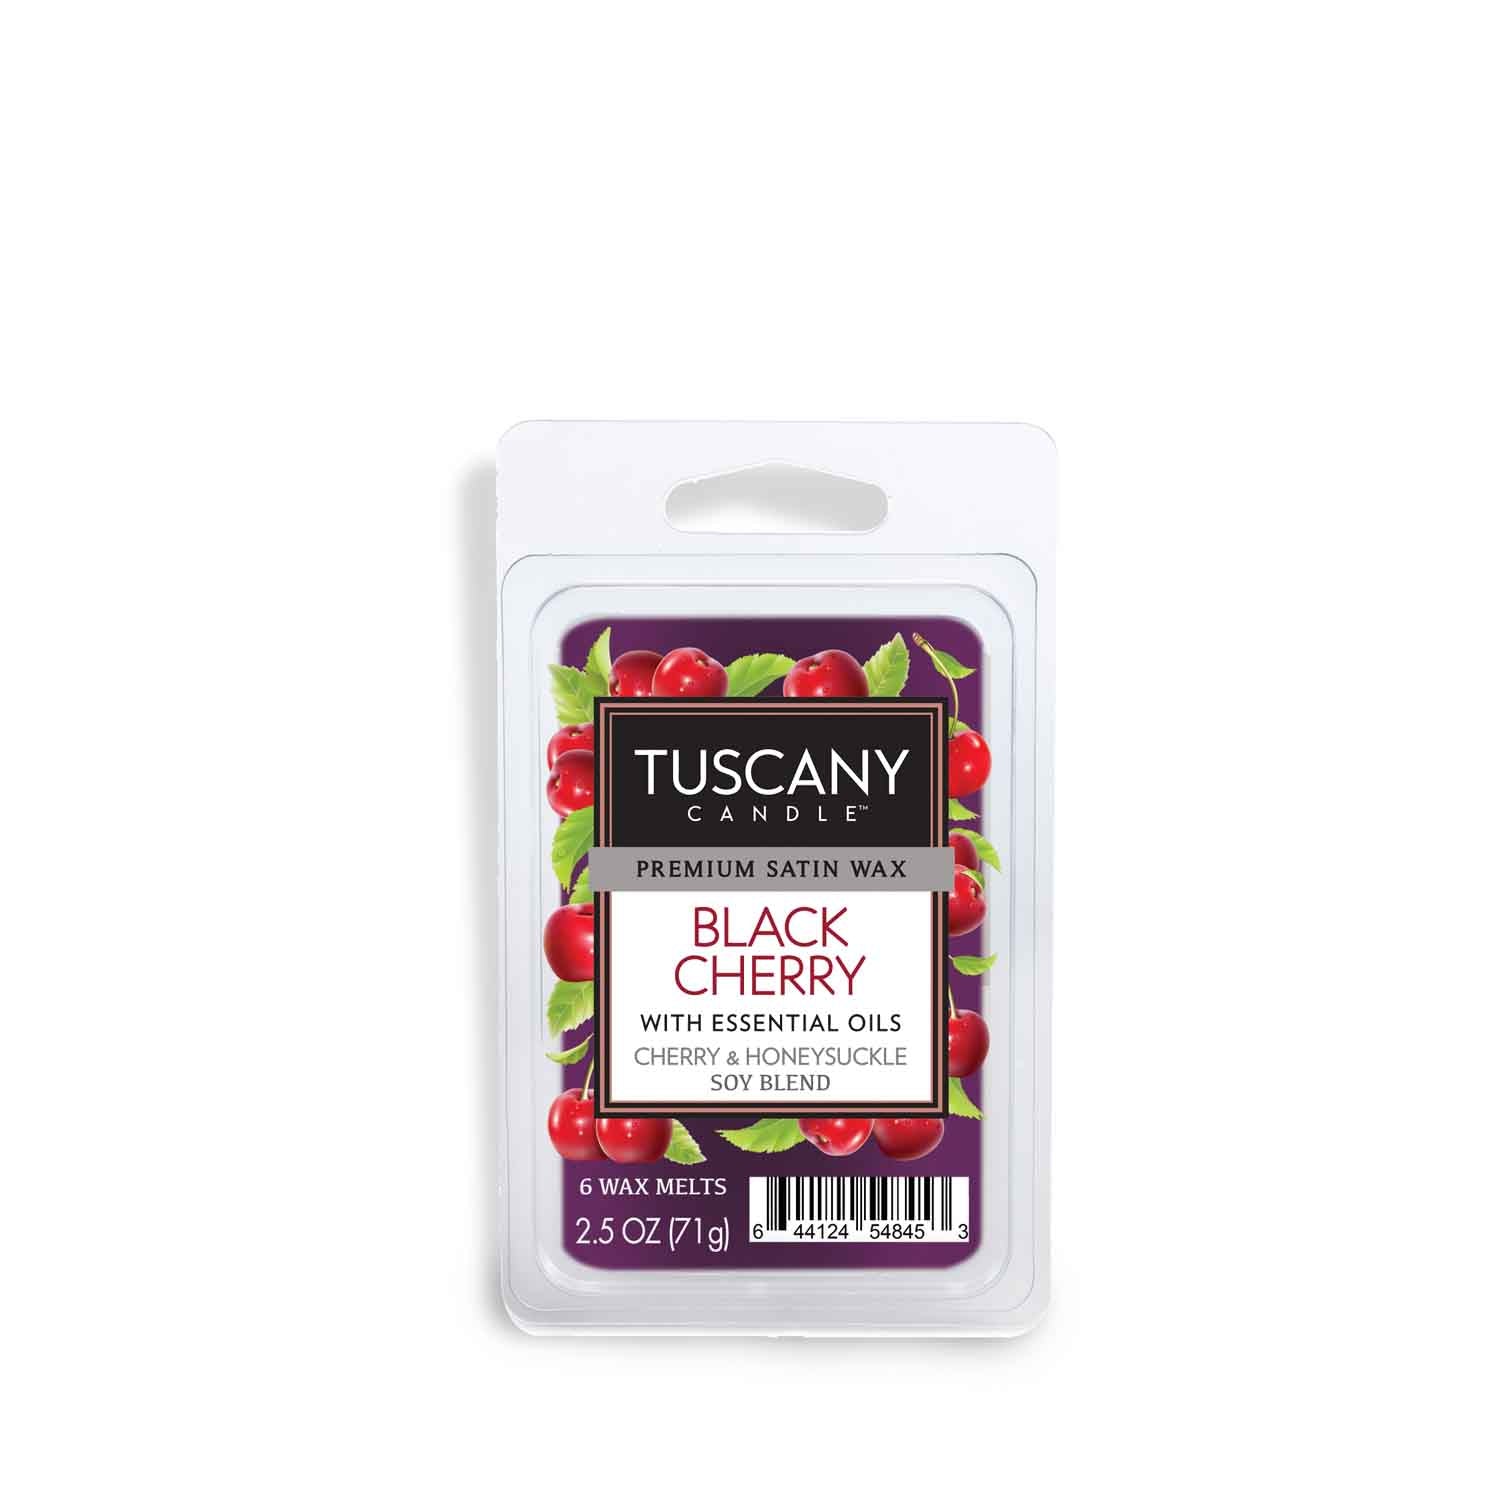 Tuscany Candle Black Cherry Scented Wax Melts (2.5 oz).